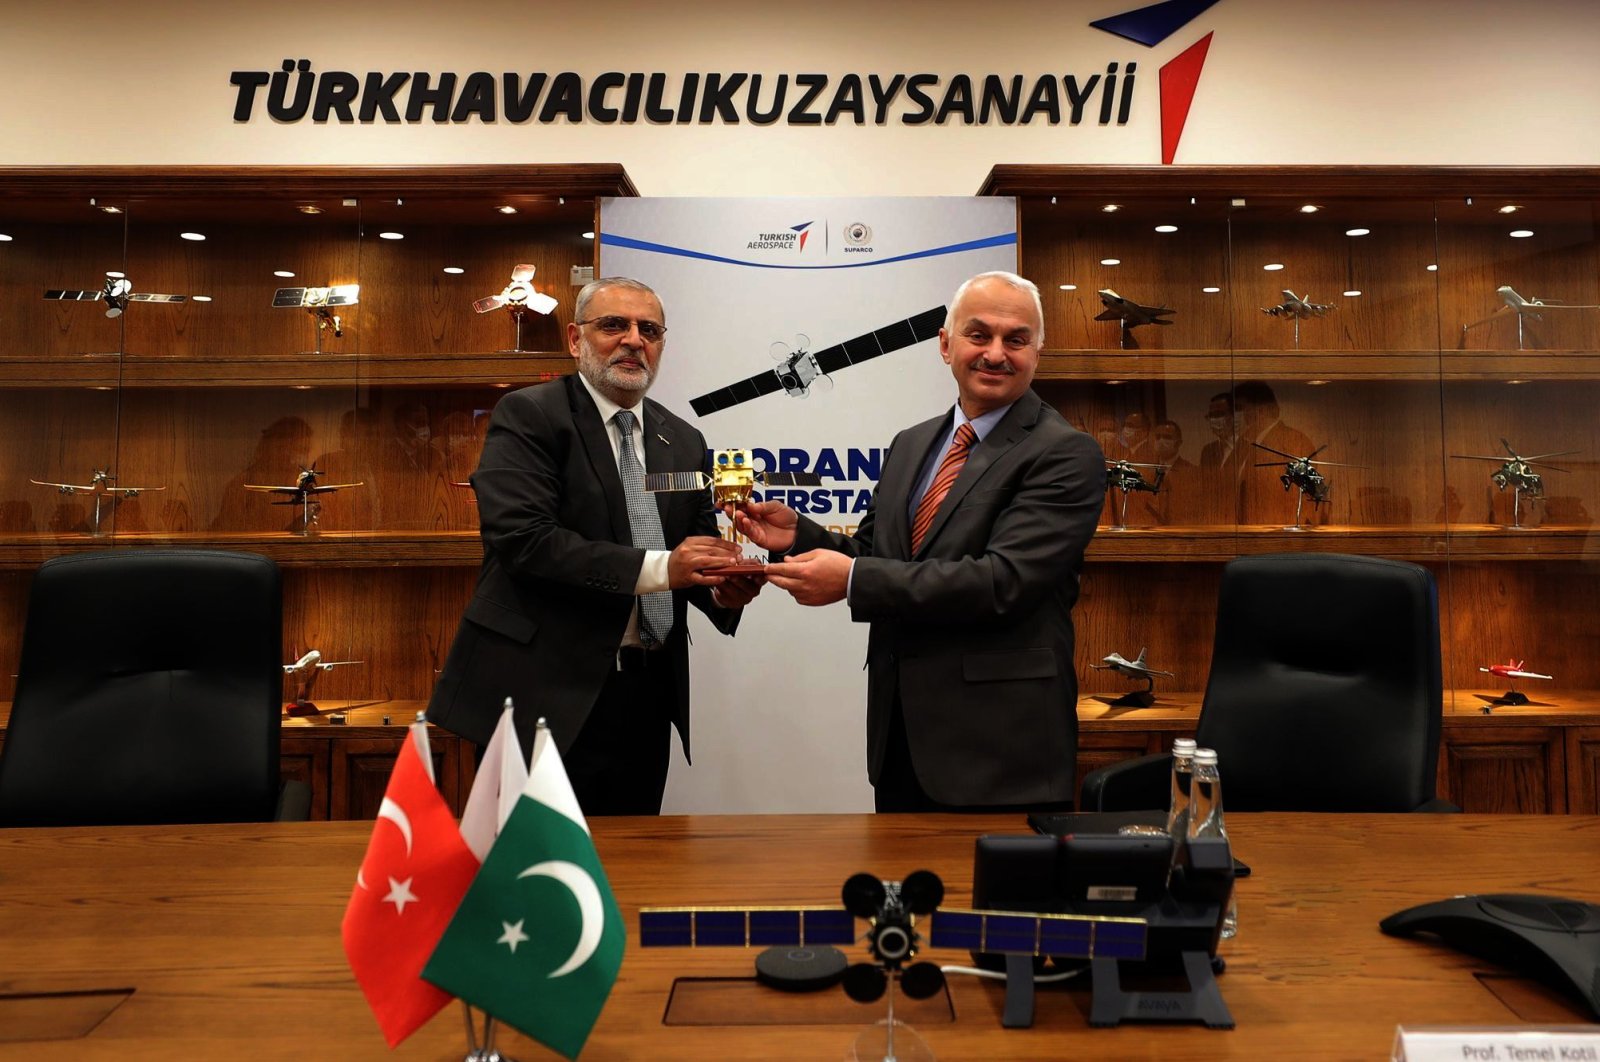 Turkish Aerospace Industries CEO Temel Kotil (R) and an oficial from Pakistani institution SUPARCO sign a cooperation agreement, Istanbul, Turkey, Jan. 26, 2022. (Twitter account of TAI)